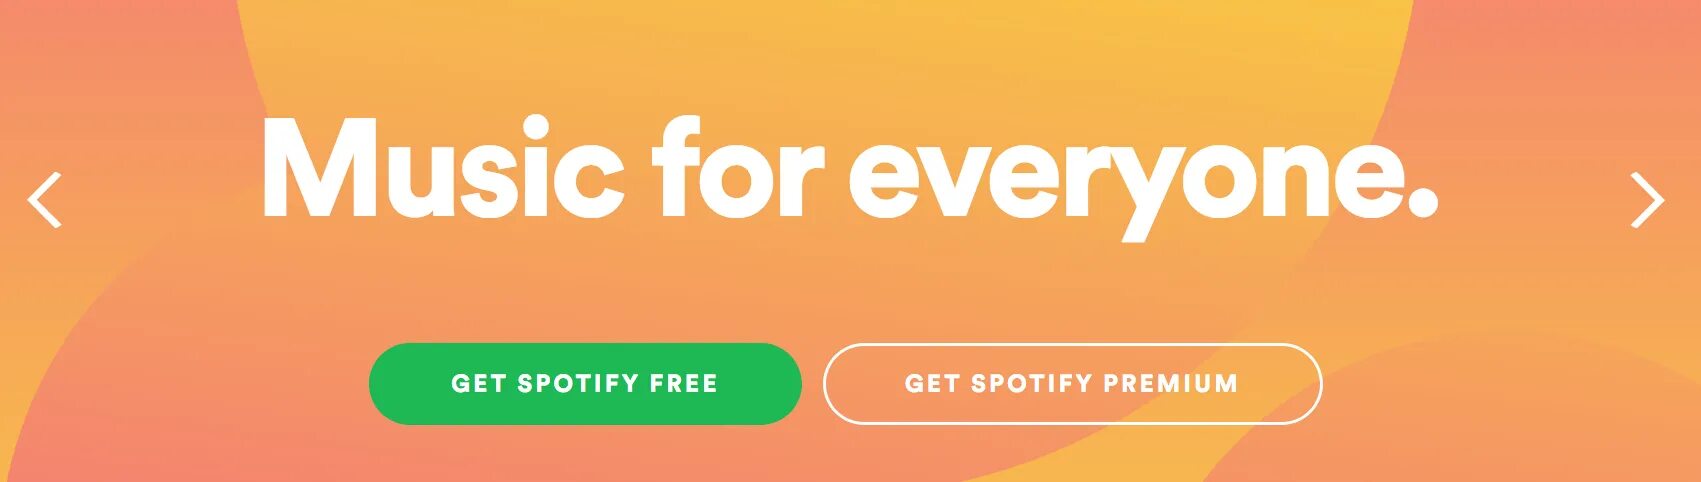 Something for everyone. Music for everyone. Music for Spotify. Music not for everyone.